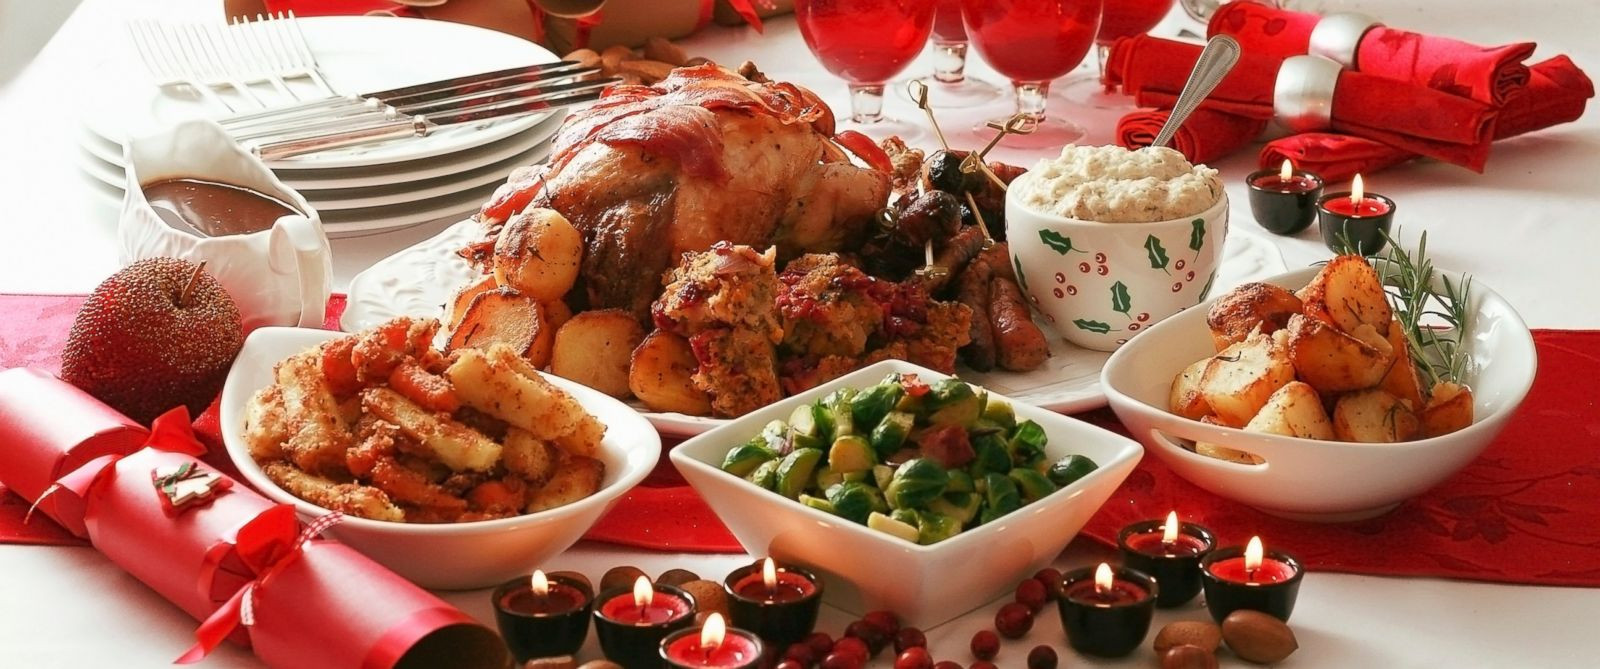 Typical Christmas Dinners
 How Many Calories the Average American Eats on Christmas